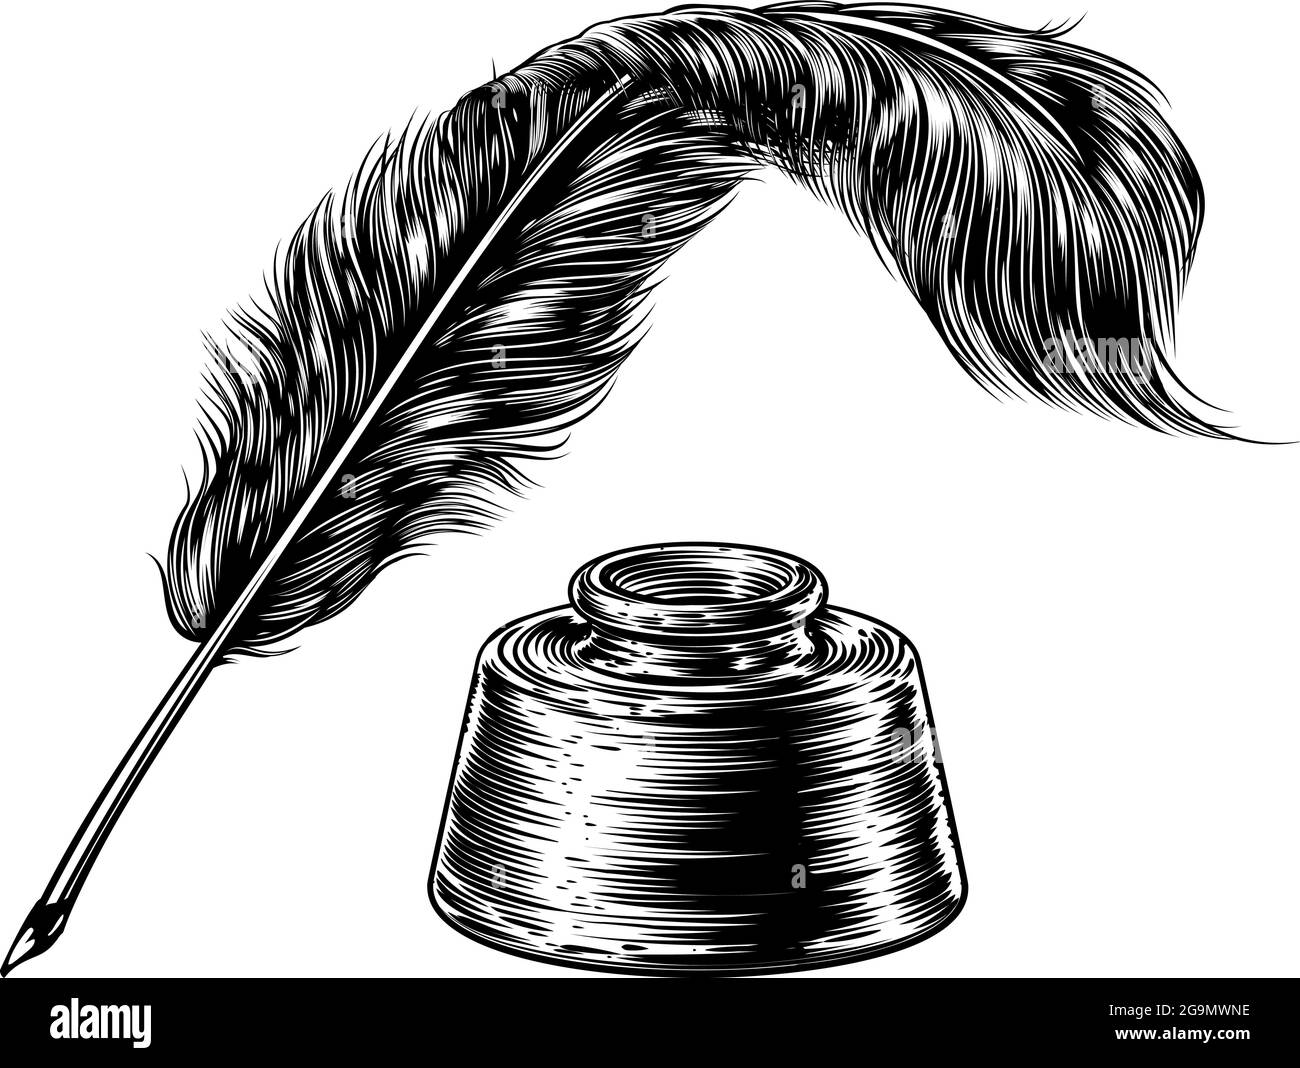 Quill pen and Ink bottle Retro illustration